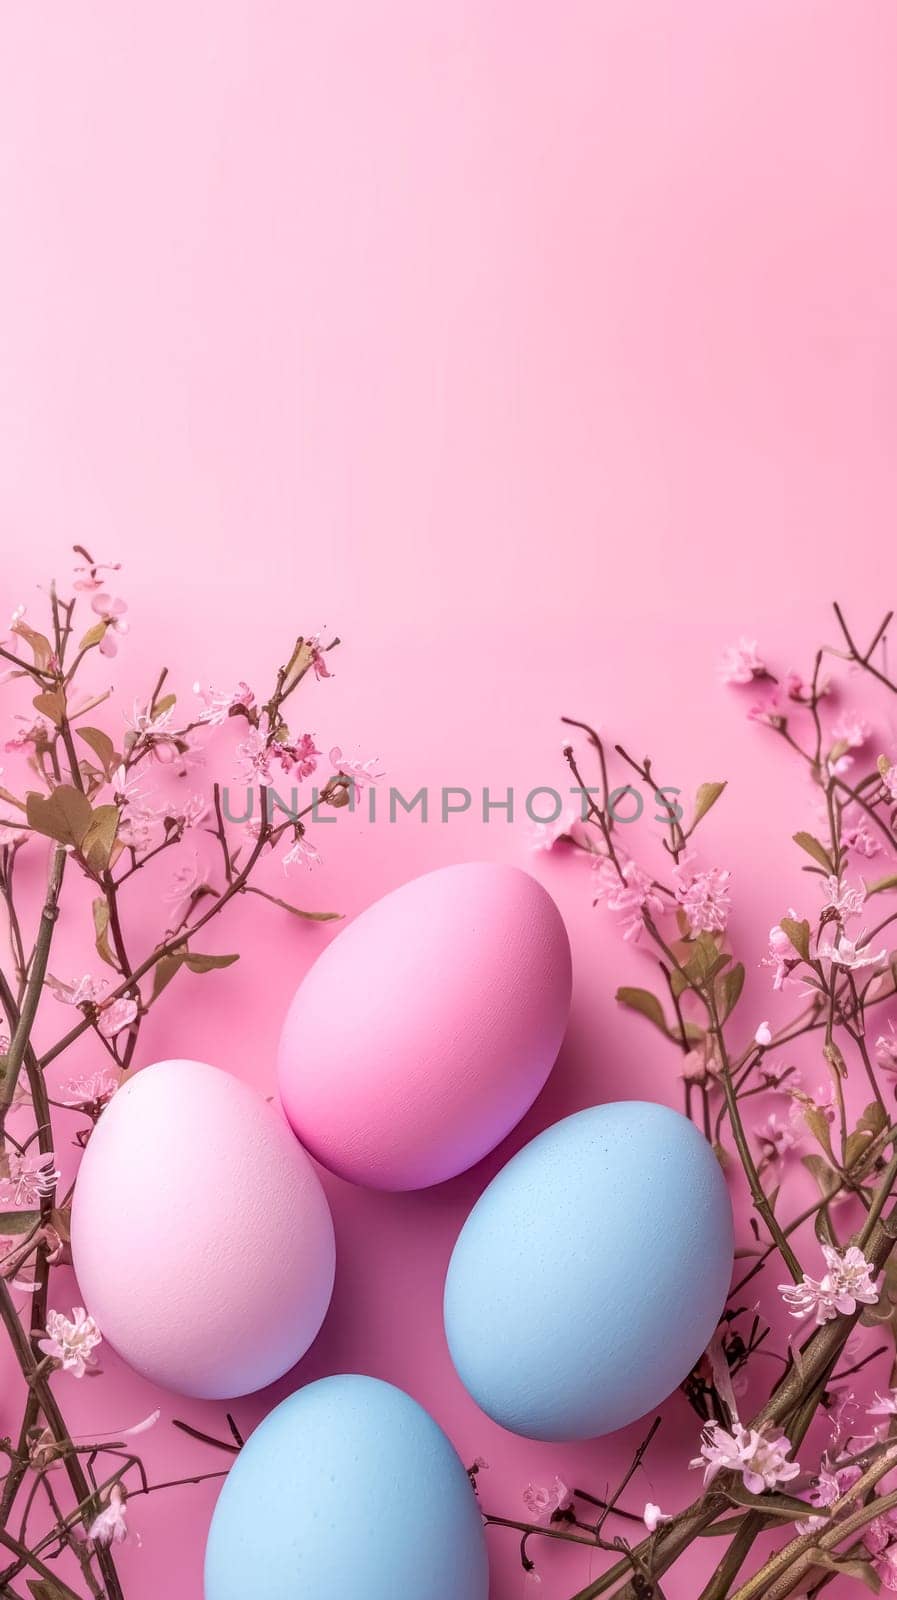 Easter composition with pastel-colored eggs amid gentle pink blossoms on a pink background, evoking a sense of springtime joy and renewal. by Edophoto